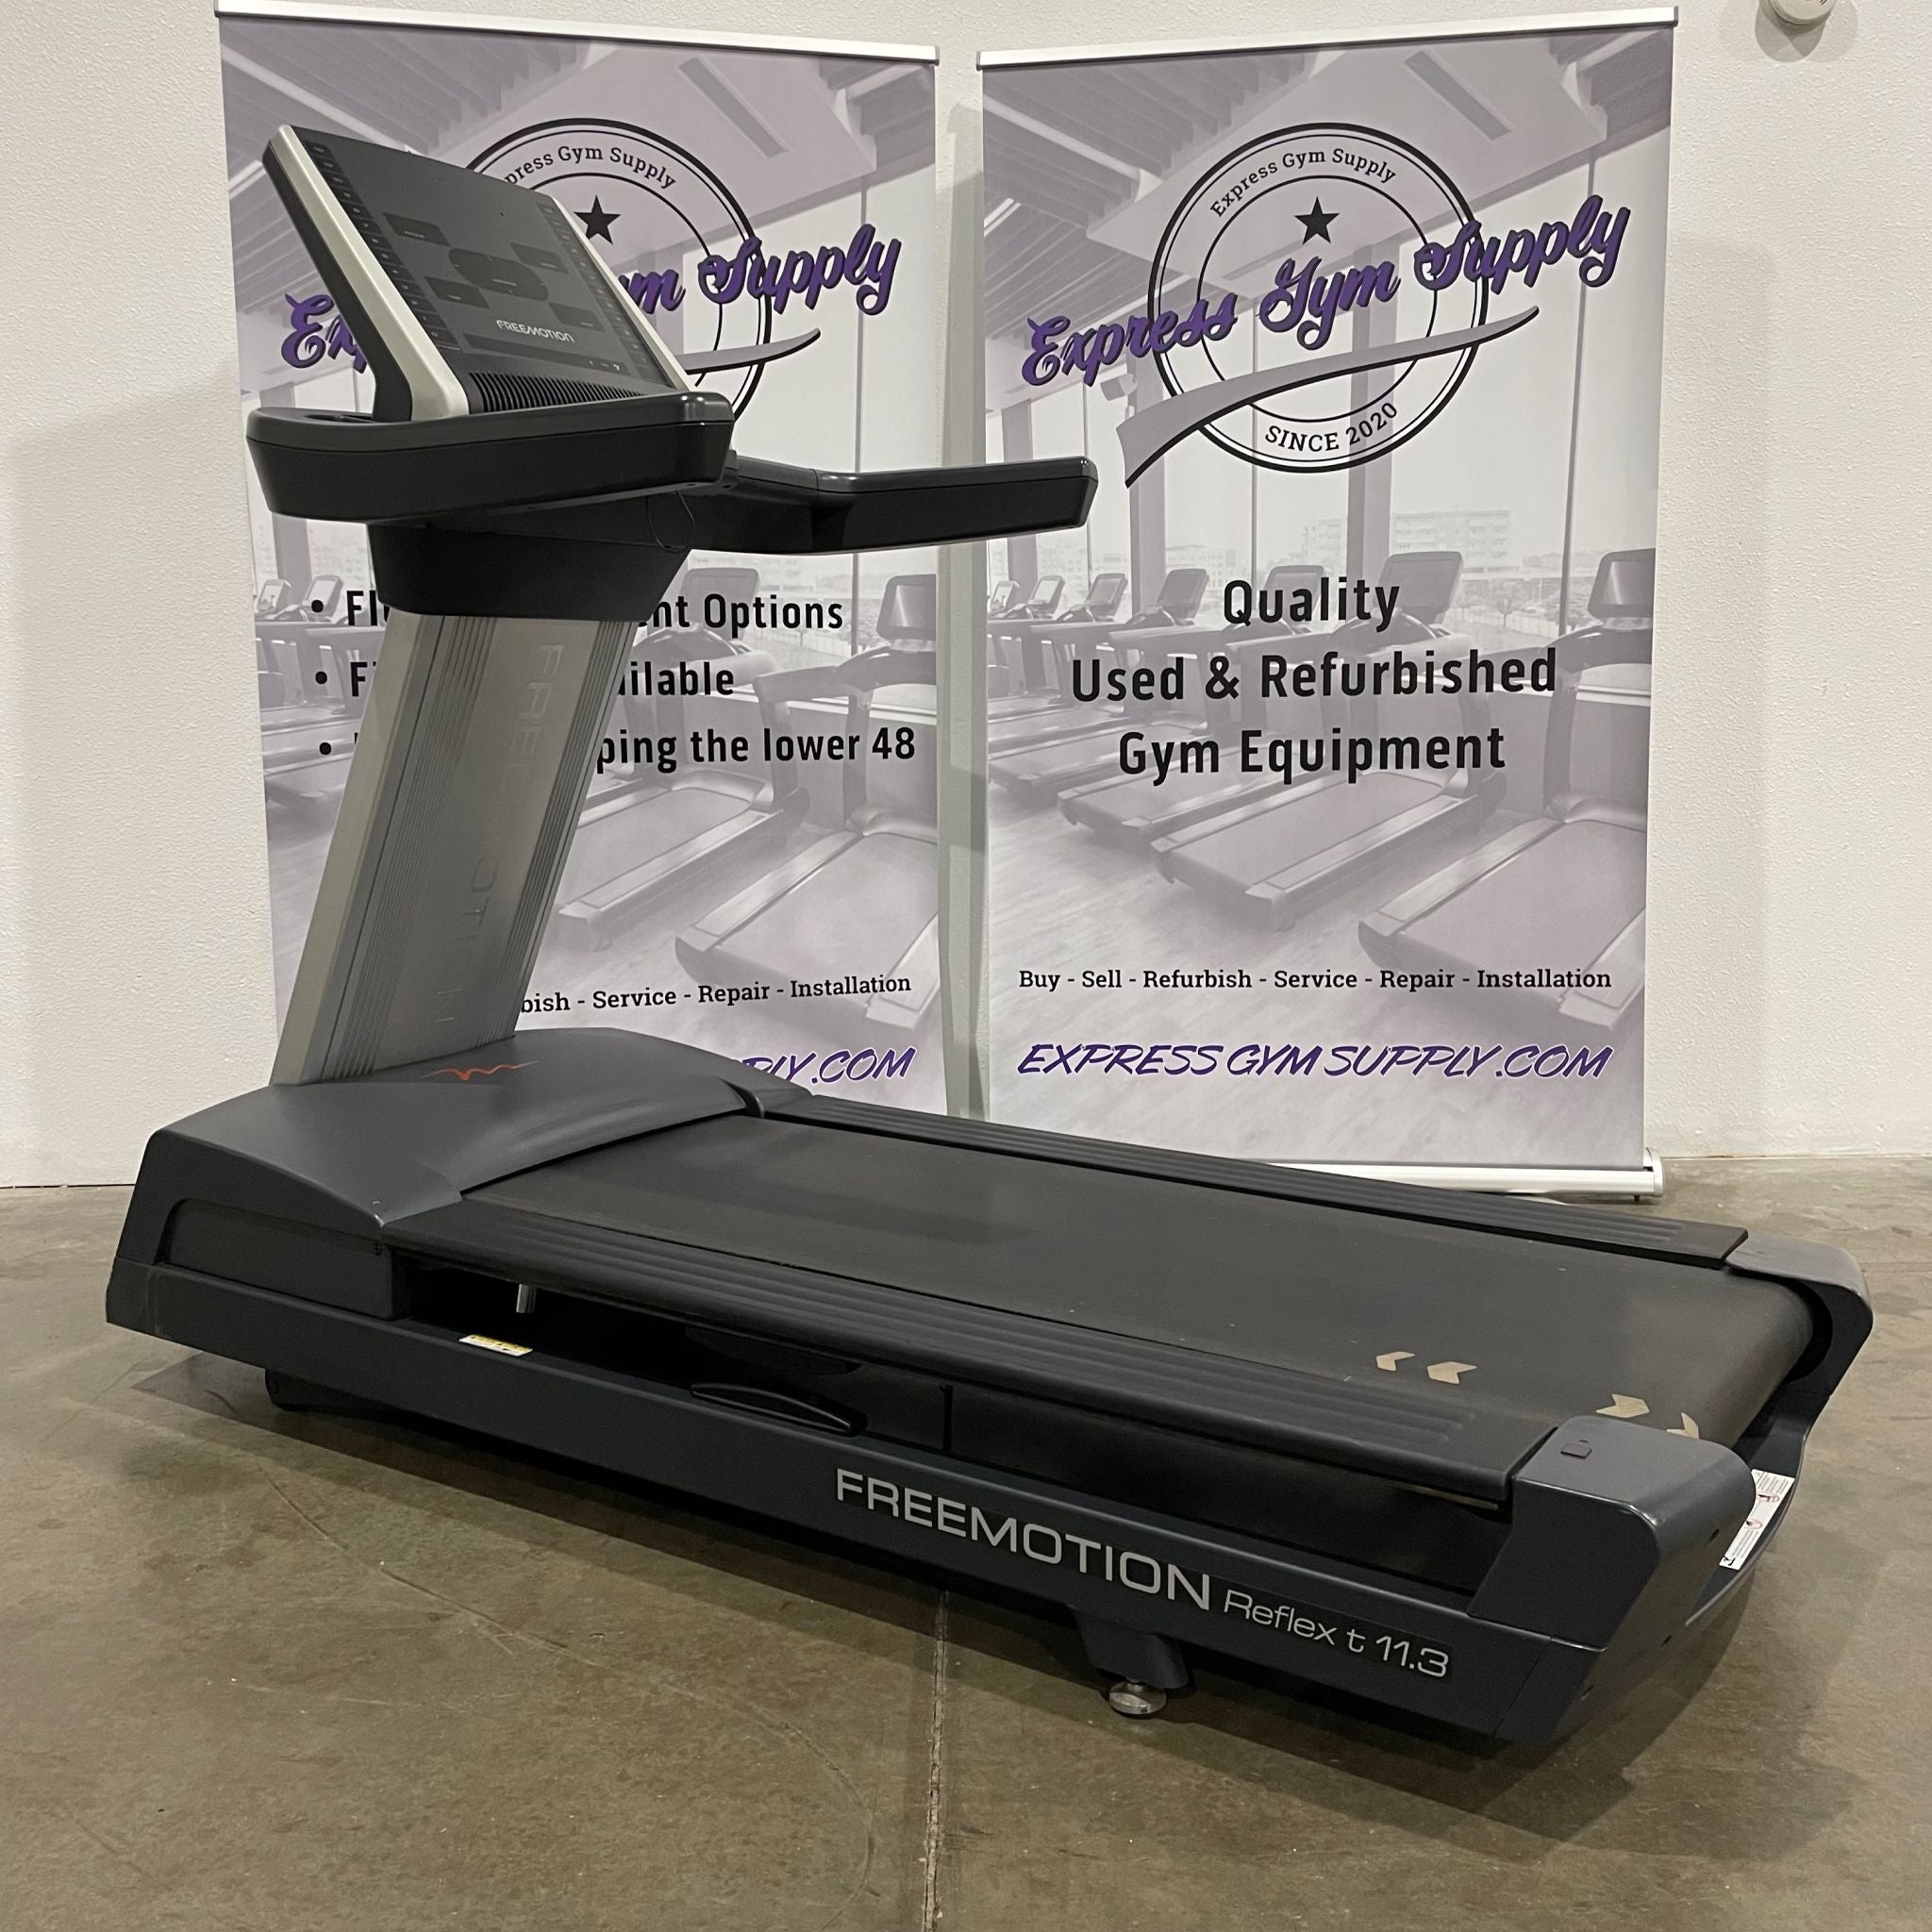 Front left view of the Freemotion Reflex t11.3 Treadmill in Warehouse